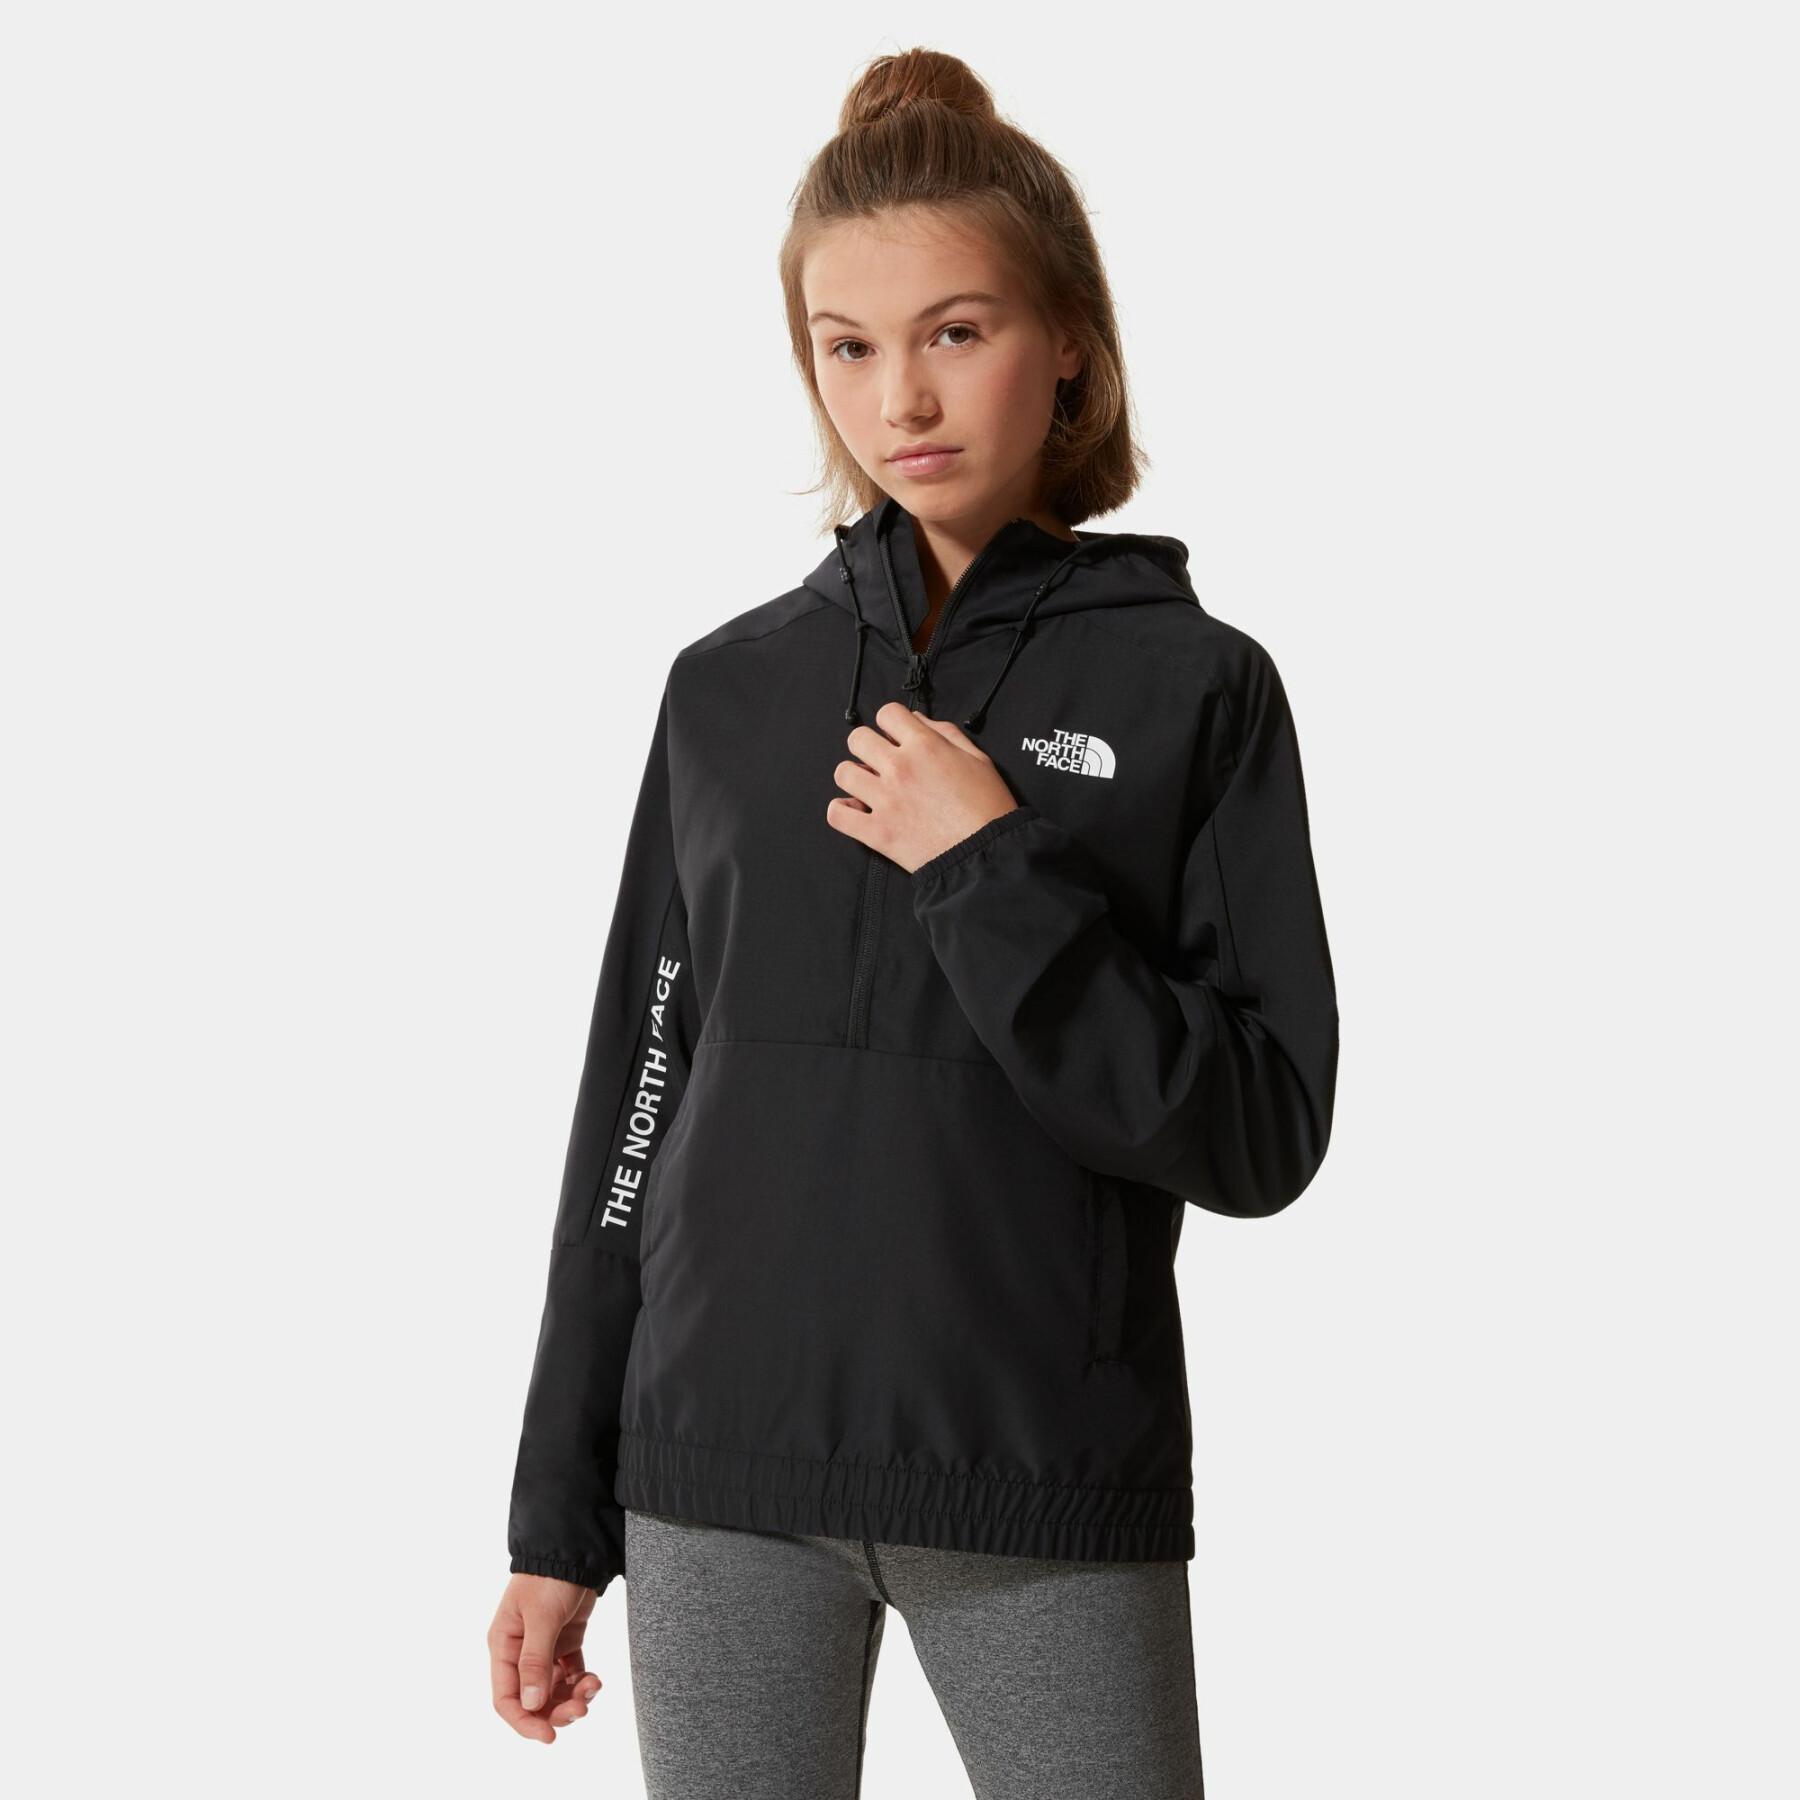 Women's waterproof jacket The North Face Ma